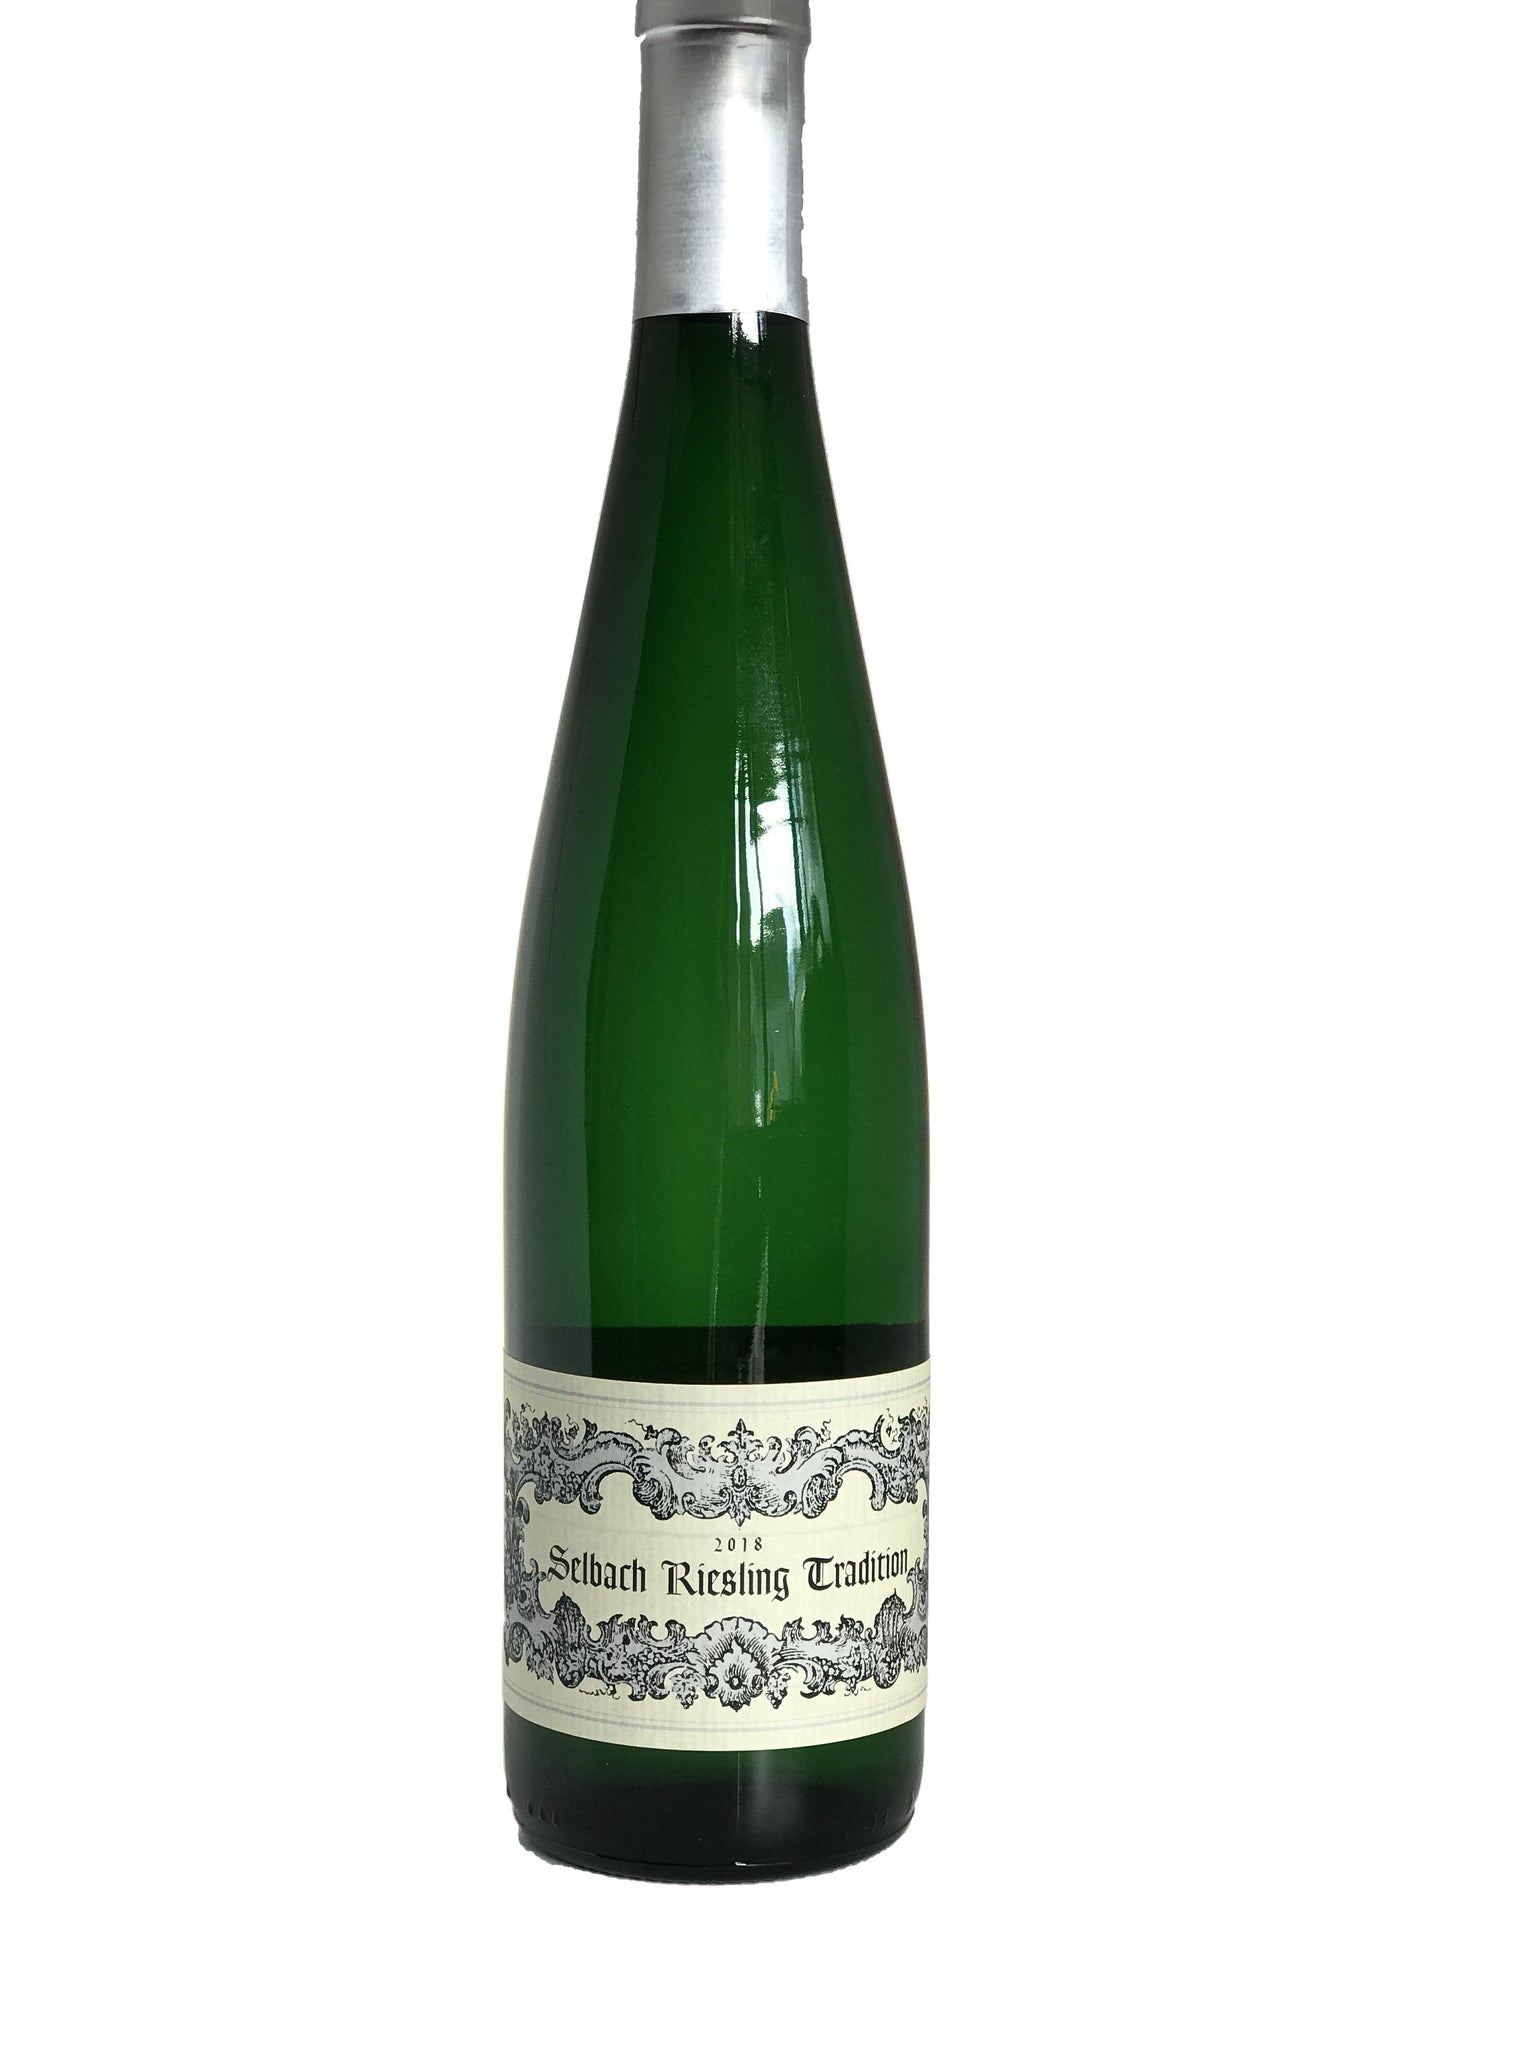 J & H Selbach Riesling Tradition 2018